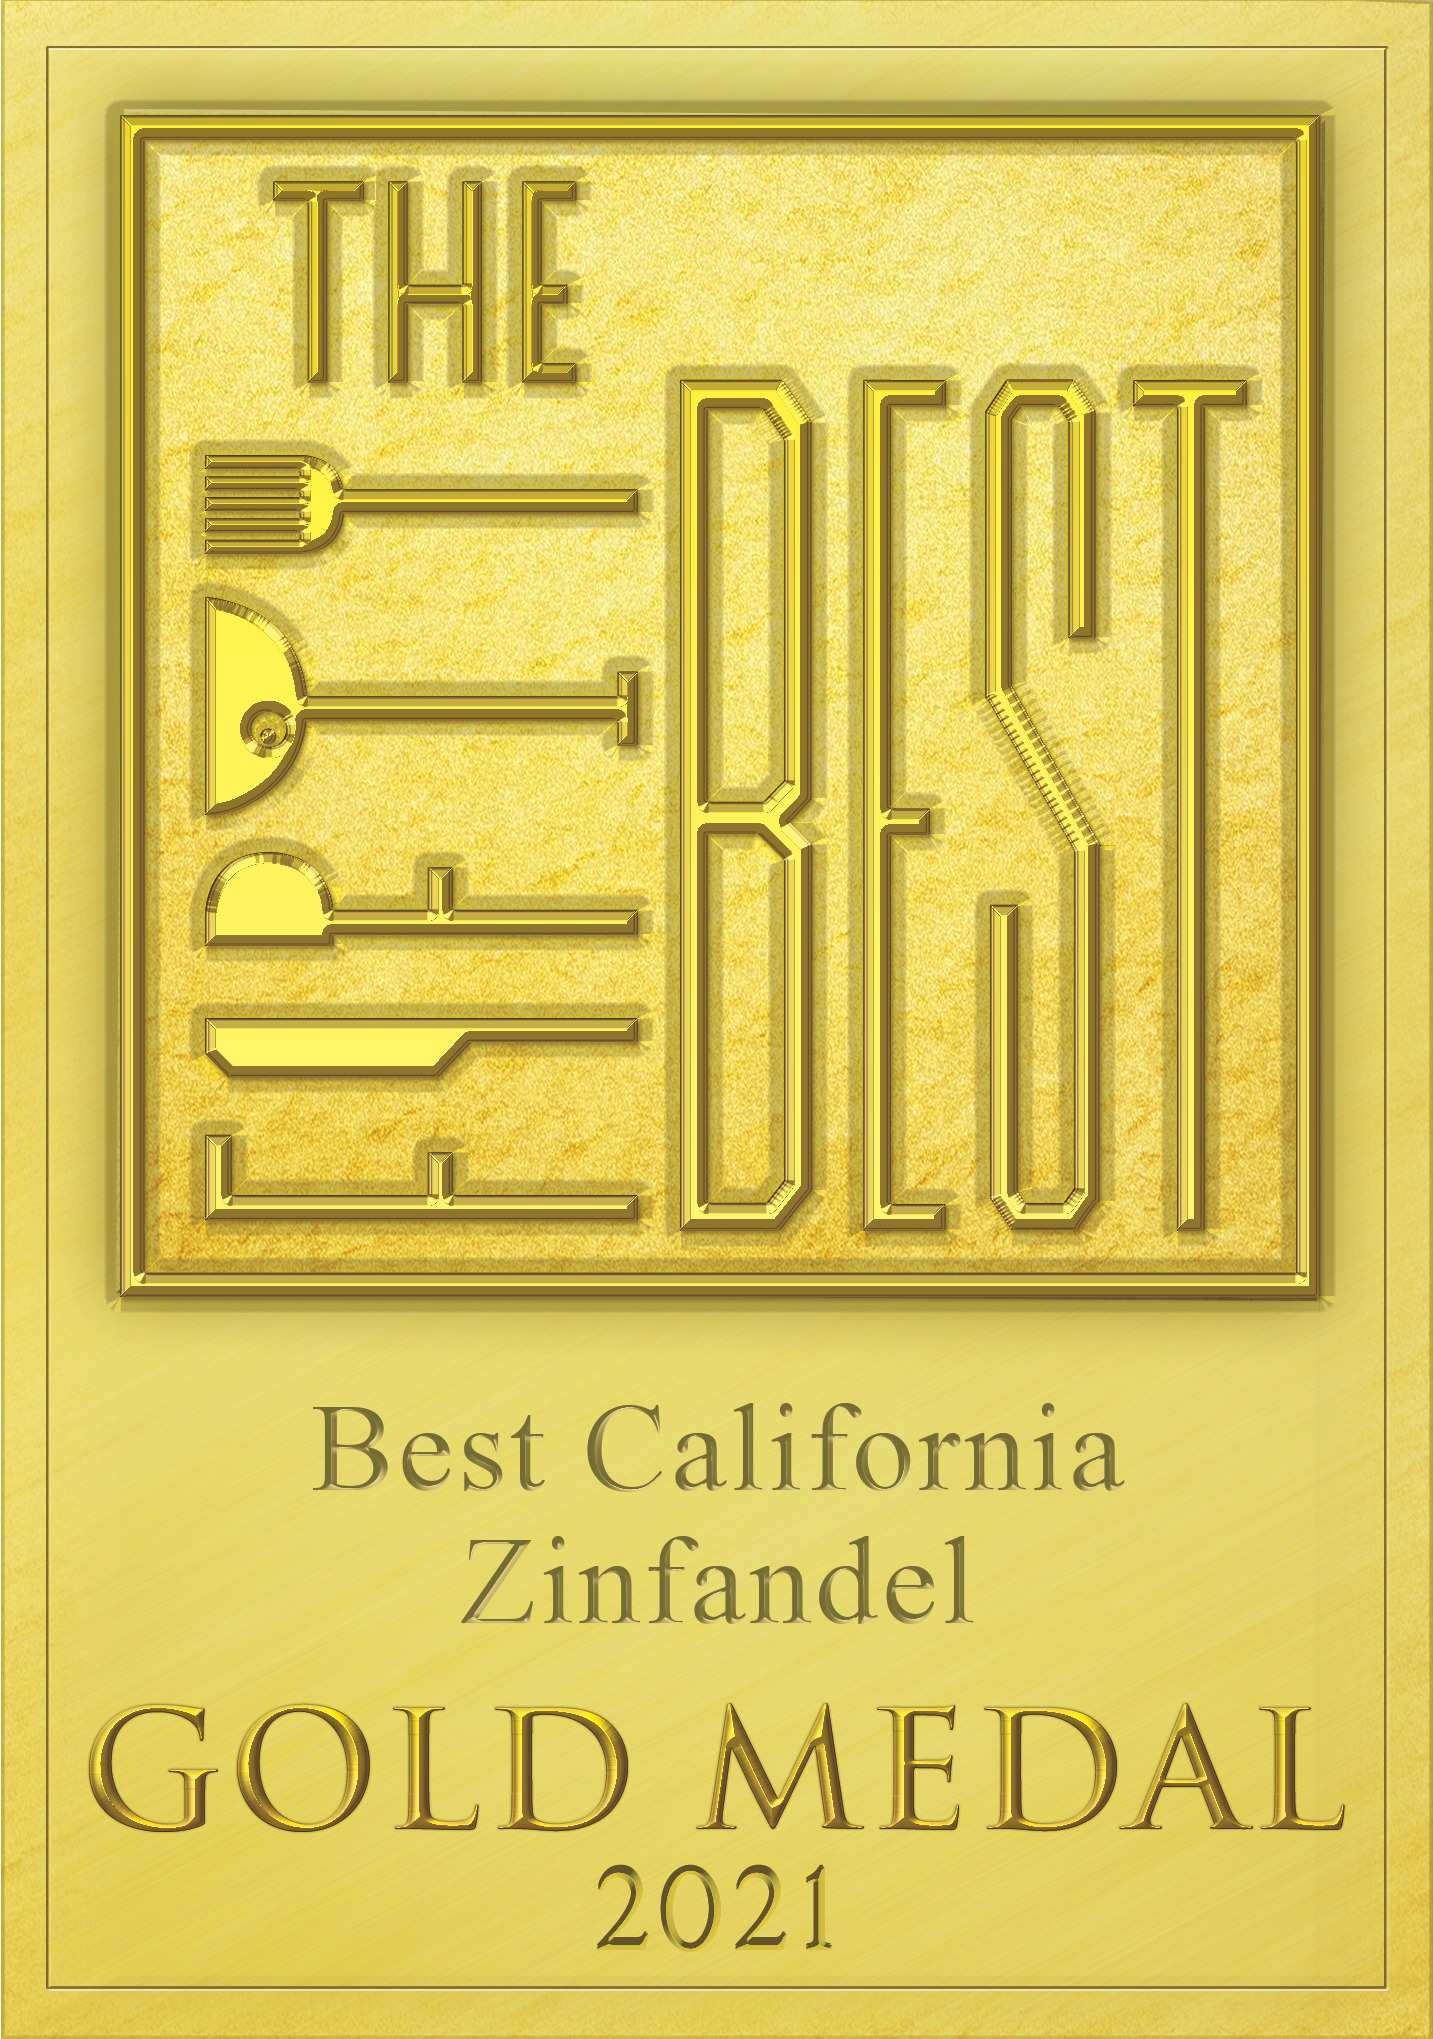 The Fifty Best - Best California Zinfandel - Gold Medal 2021